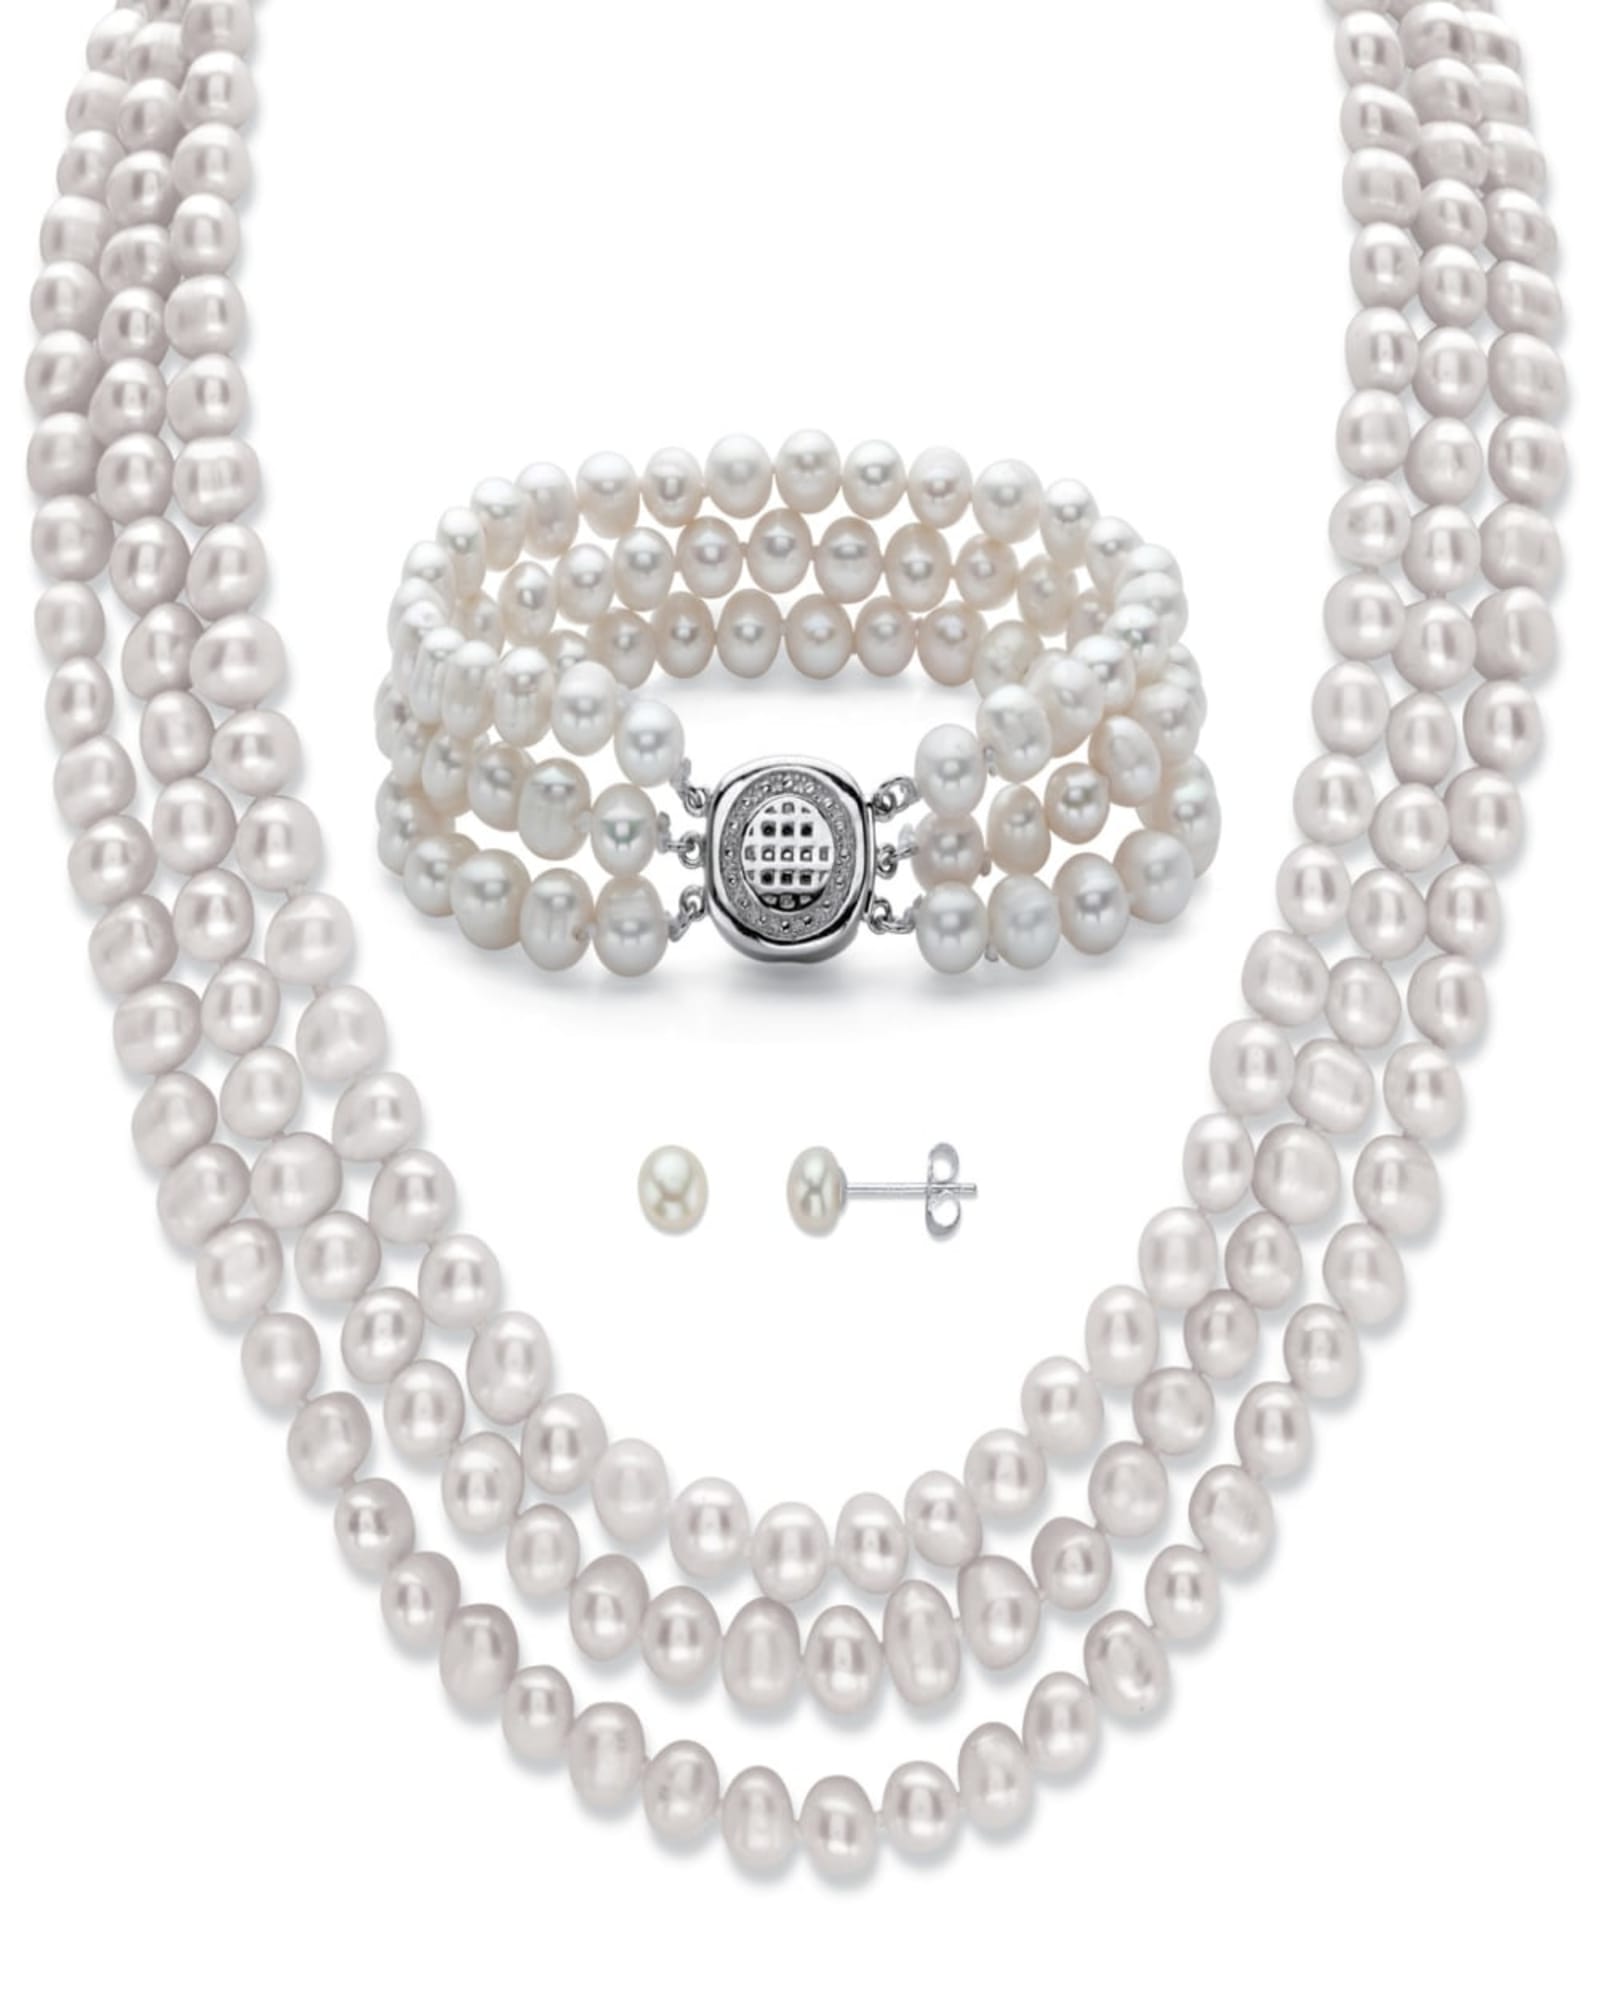 Round Genuine Cultured Pearl .925 Silver Earring, Necklace and Bracelet Set 18